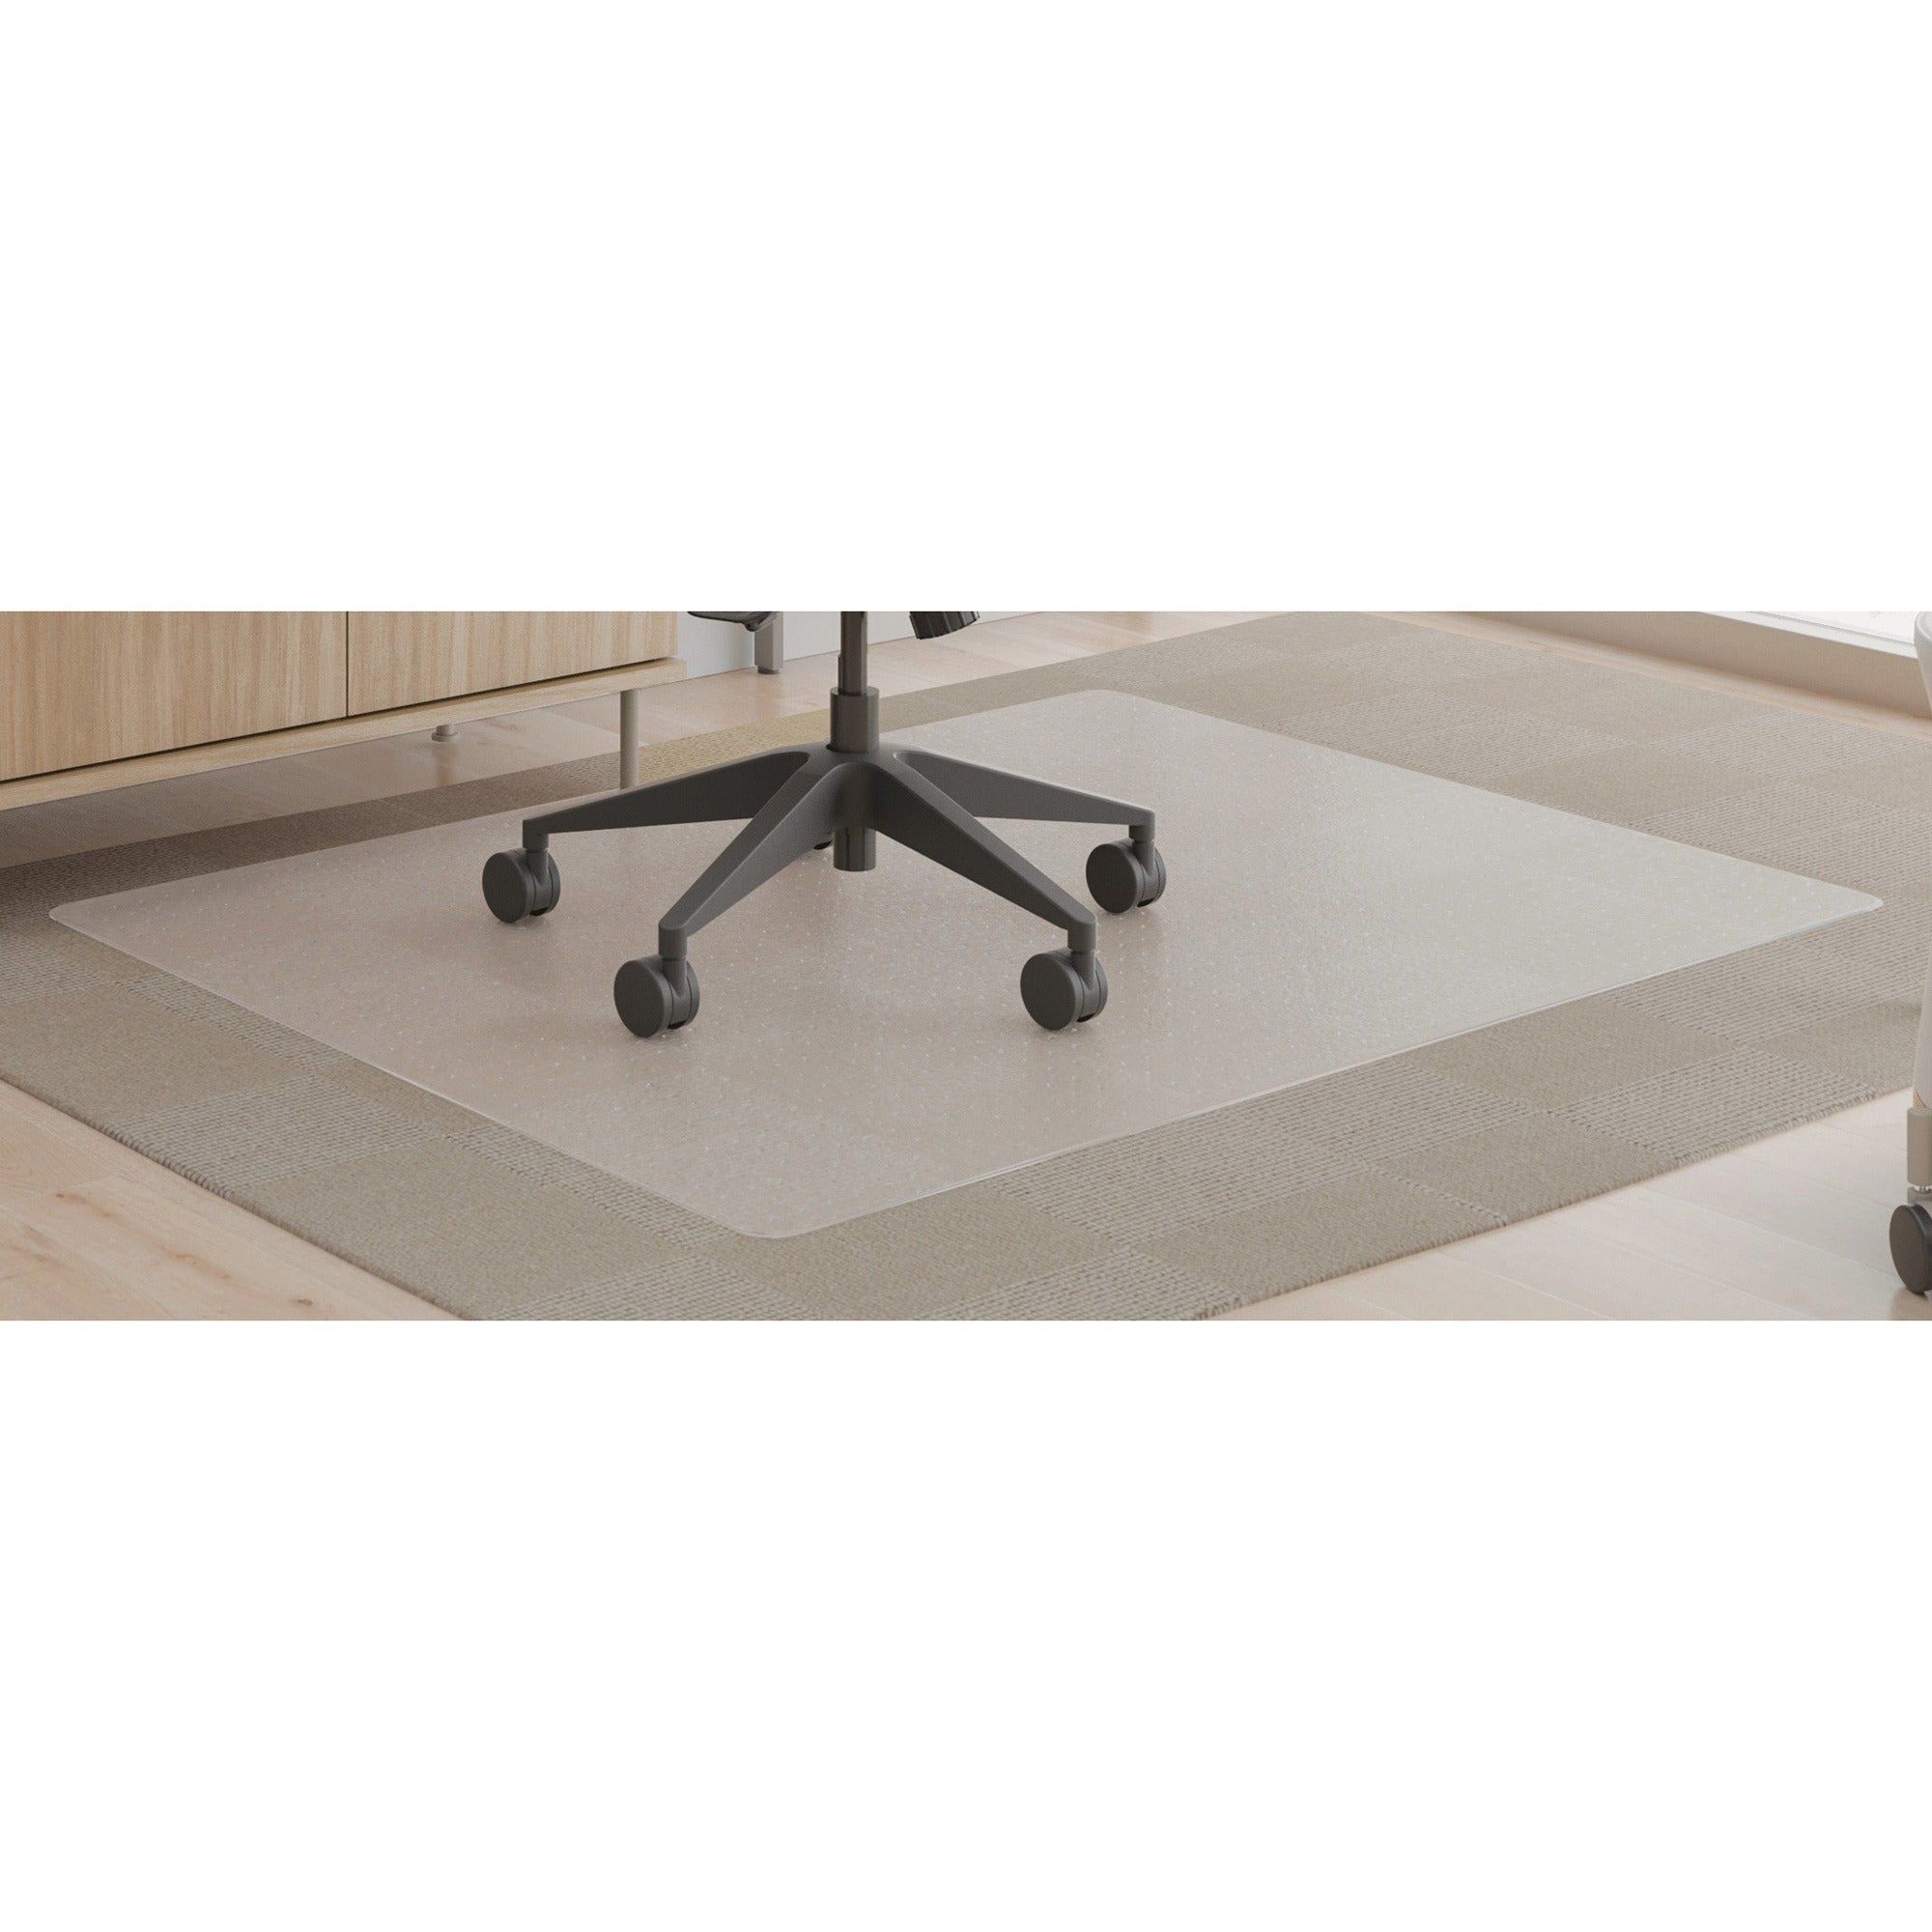 deflecto-supermat+-chairmat-home-office-commercial-60-length-x-46-width-x-0500-thickness-rectangular-polyvinyl-chloride-pvc-clear-1-carton_defcm14442facom - 1